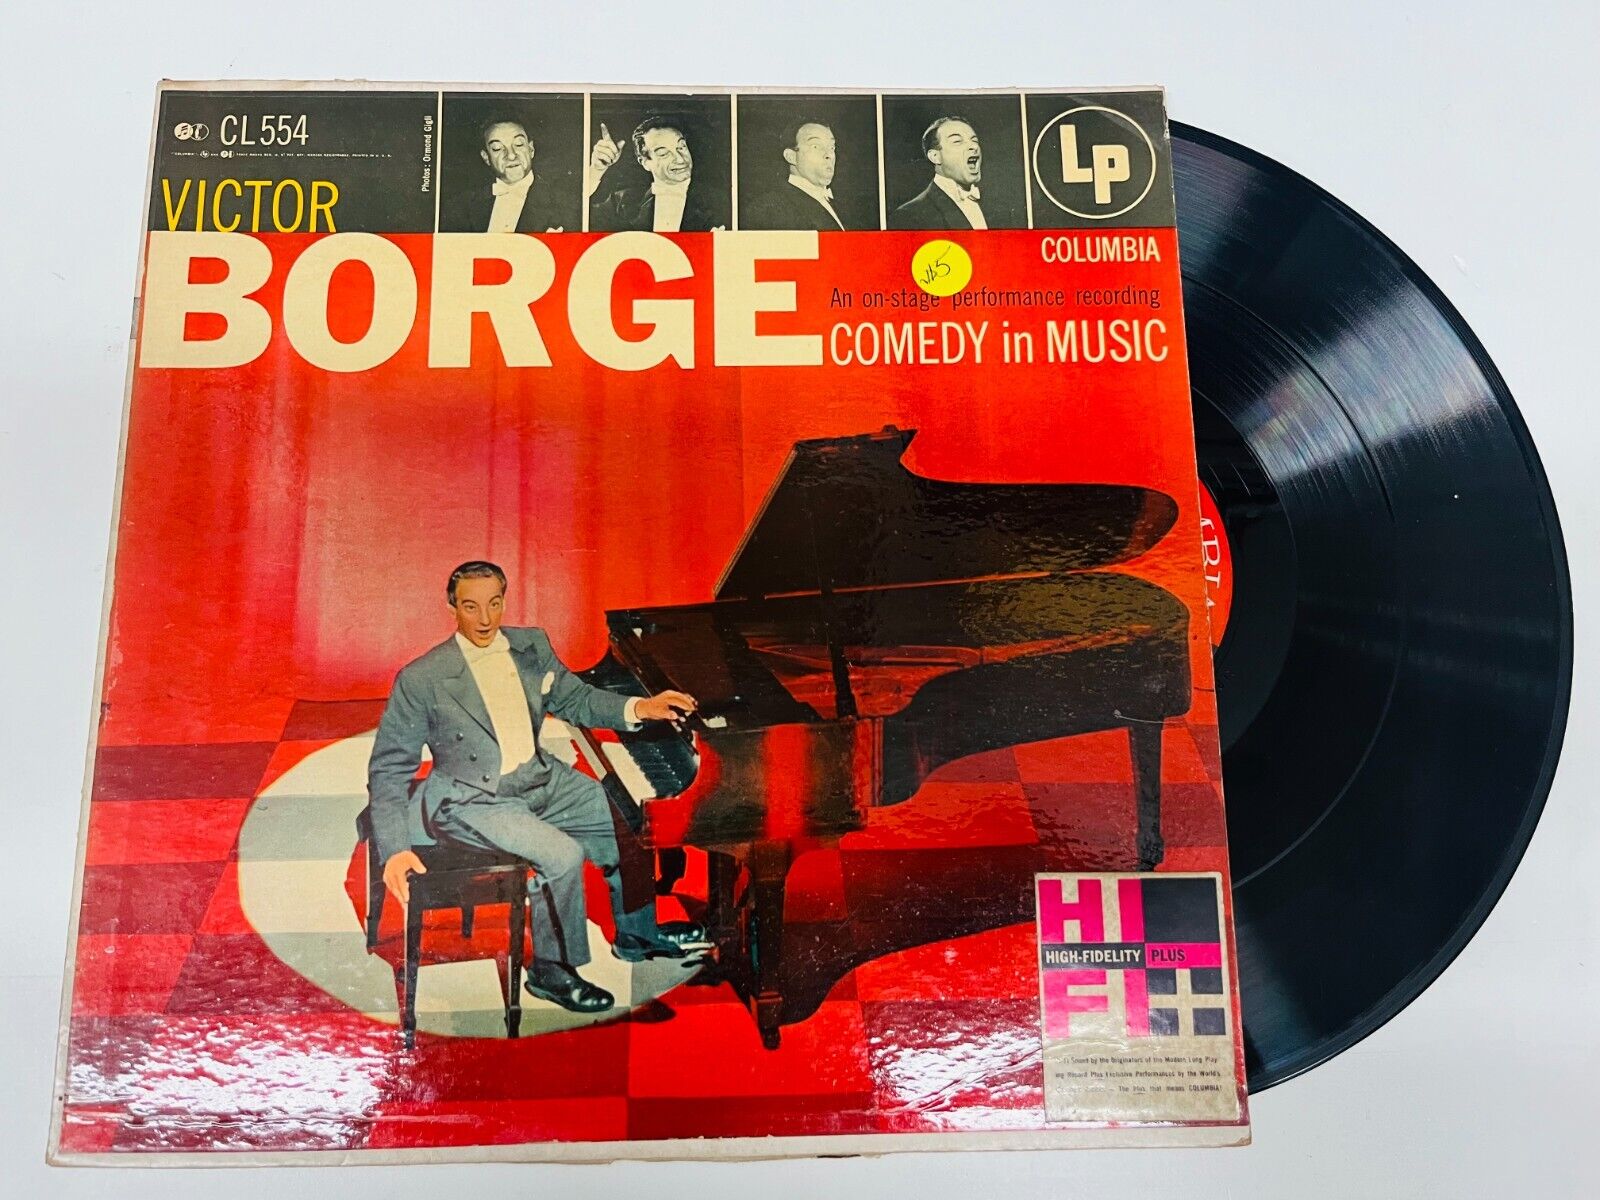 Victor Borge Comedy in Music CL554 Columbia Recorde 1953 VG+